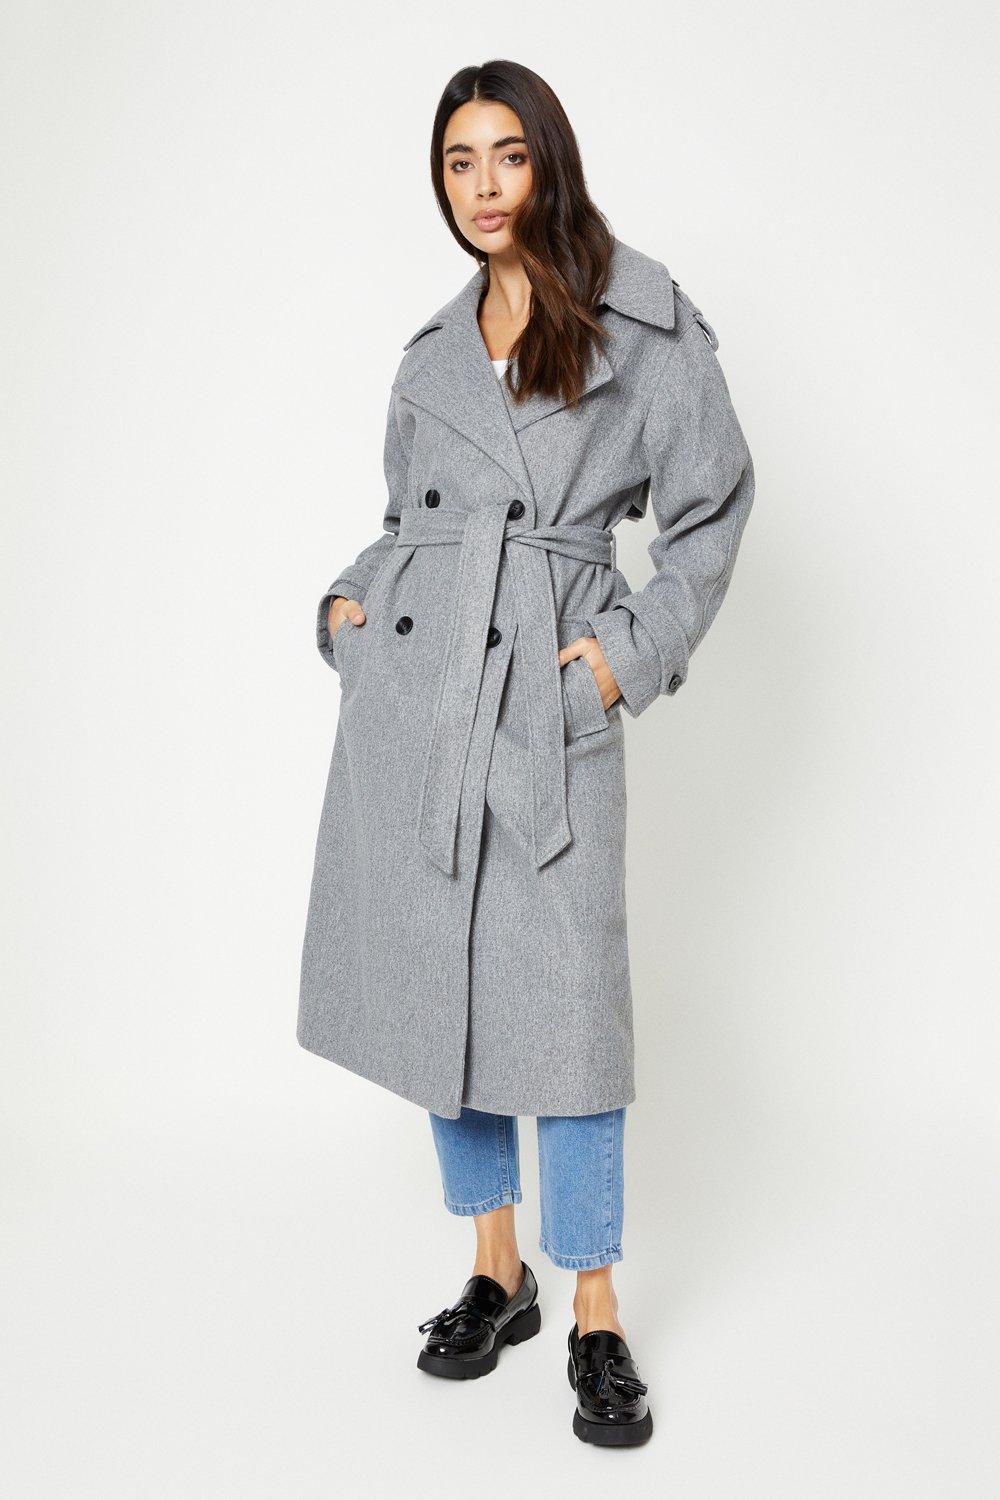 Women’s Belted Wool Look Trench Coat - grey marl - L